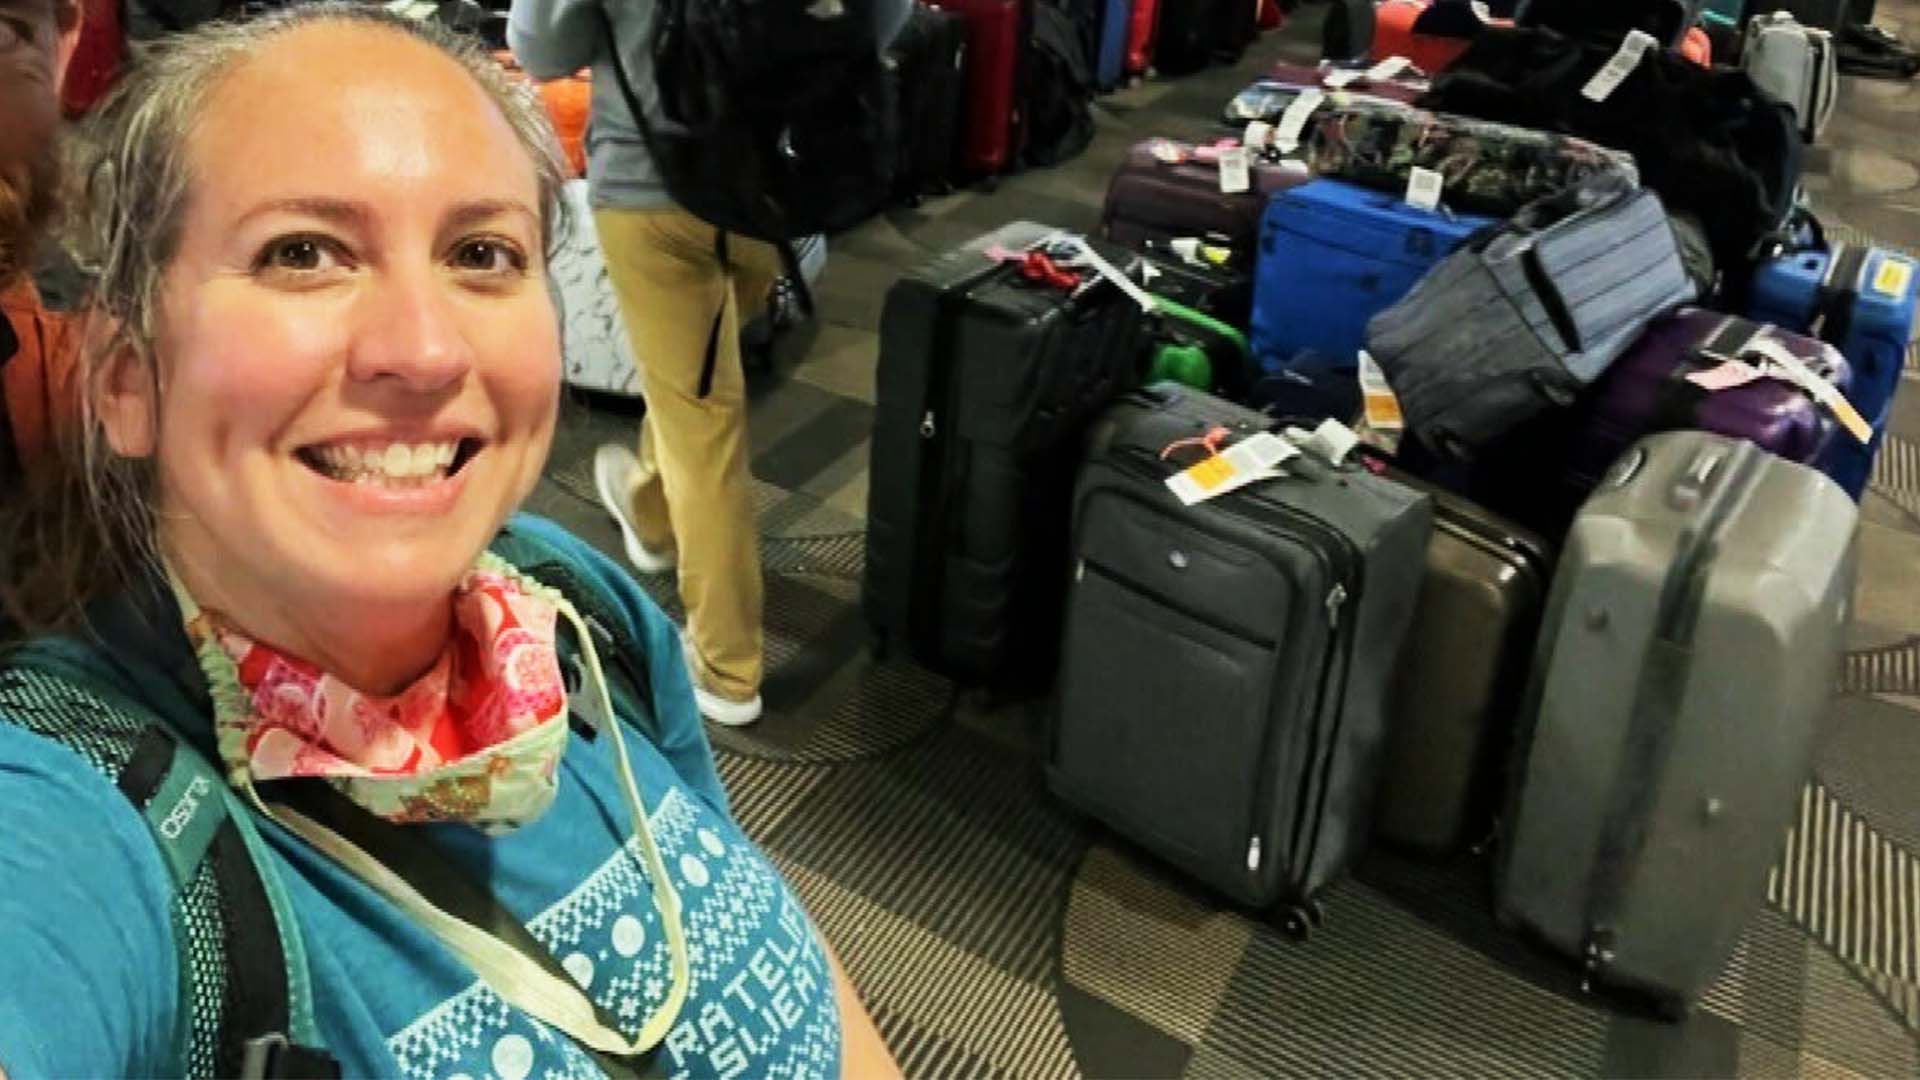 Teacher Reunites Travelers With Their Lost Luggage